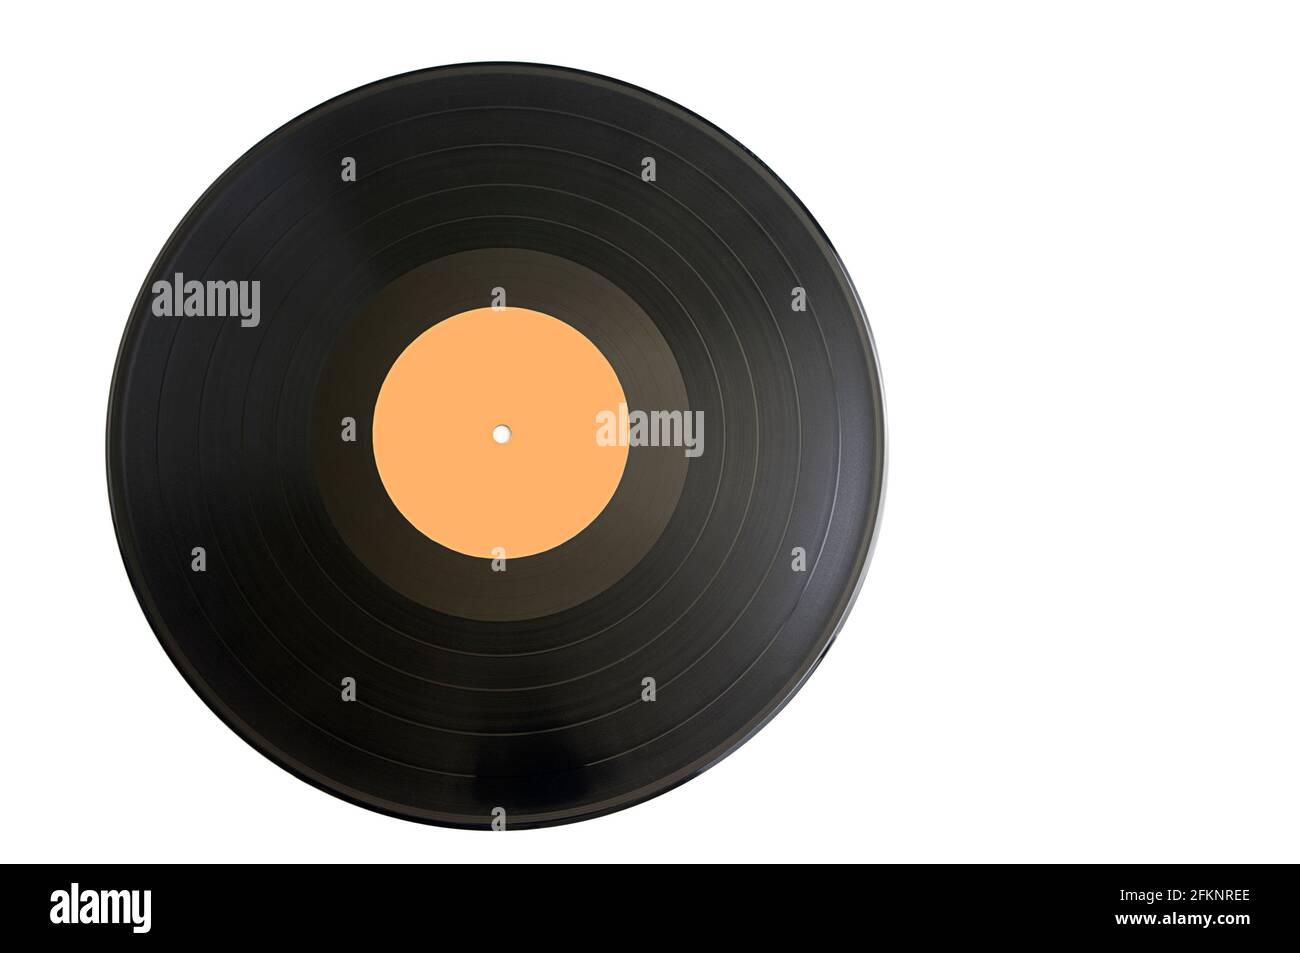 Oldest music disc ready to hear good sound Stock Photo